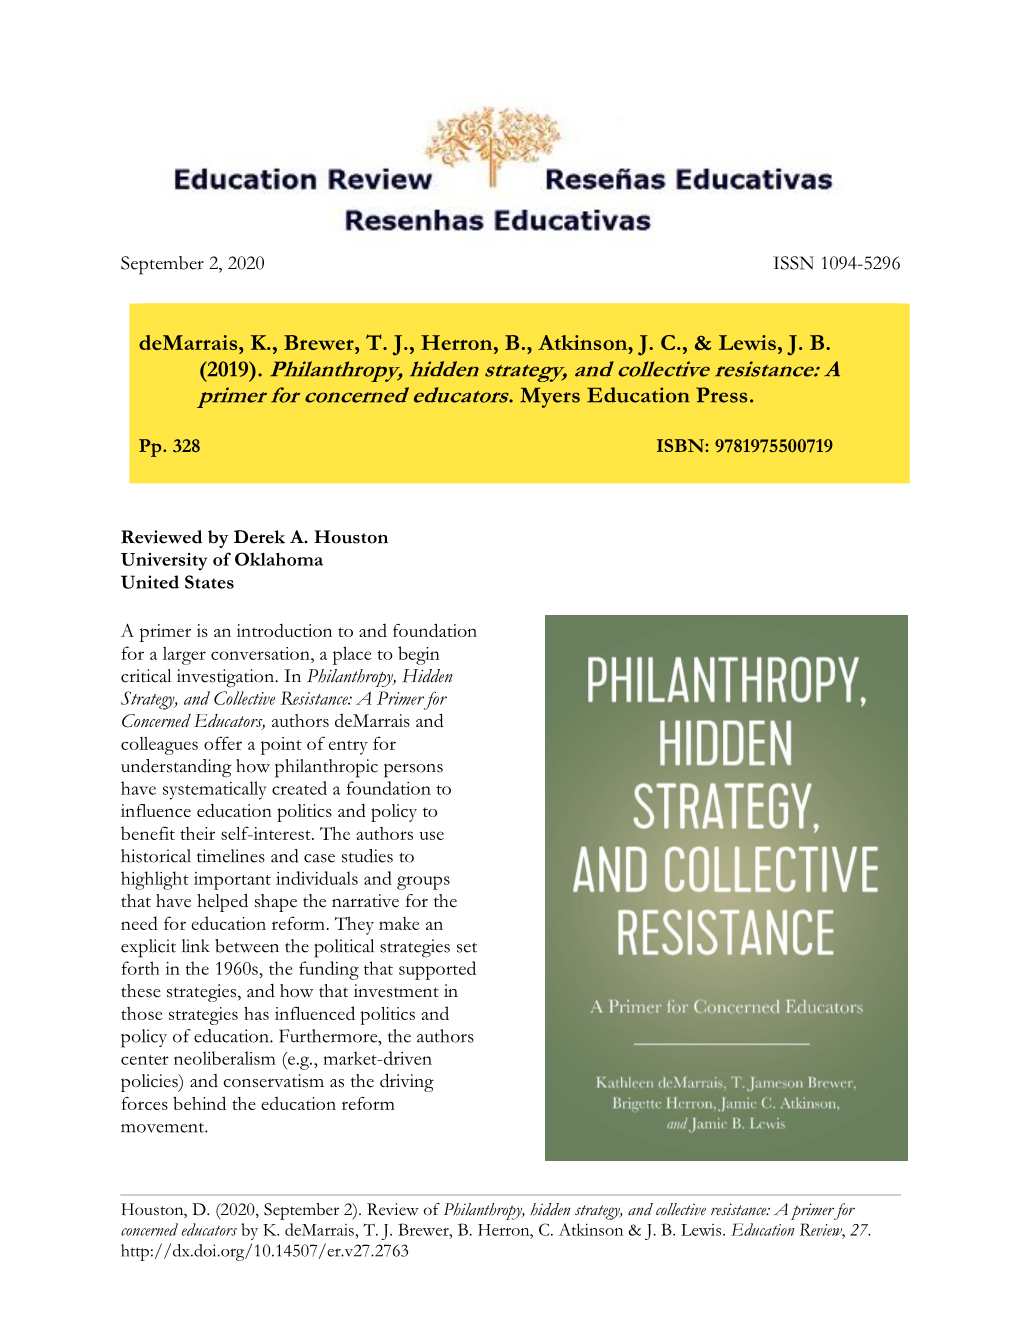 Review of Philanthropy, Hidden Strategy, and Collective Resistance: a Primer for Concerned Educators by K